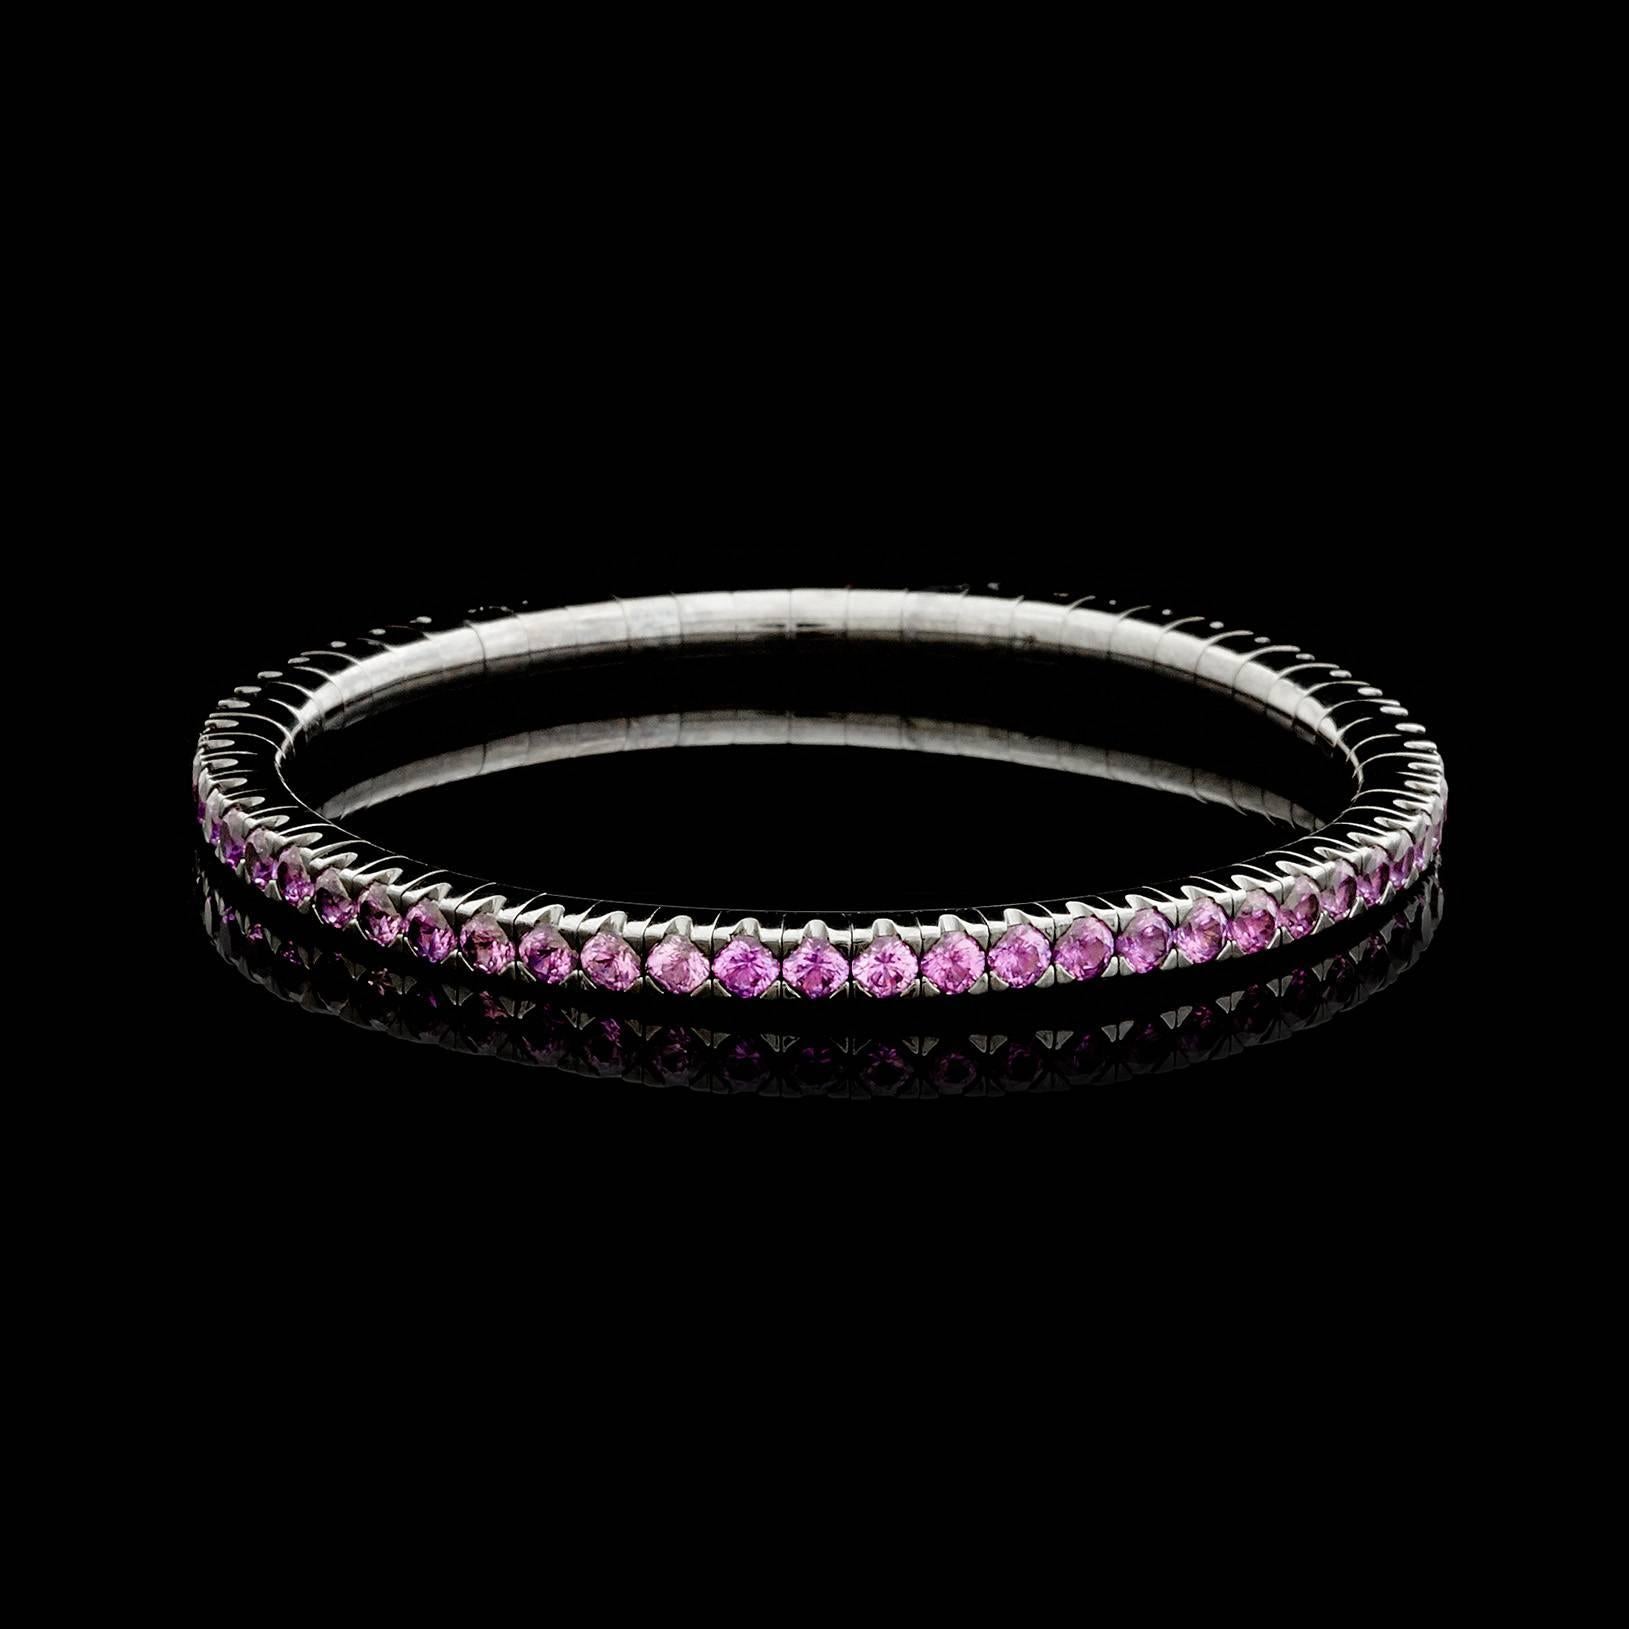 Mattia Cielo 'Universo Expandable Bracelet' features 7.24 carats of round brilliant-cut pink sapphires set in 18k blackened gold. The bangle is designed as an expandable, metal-spring line bracelet, fits a 6 inch wrist, and measures 3.7mm wide.